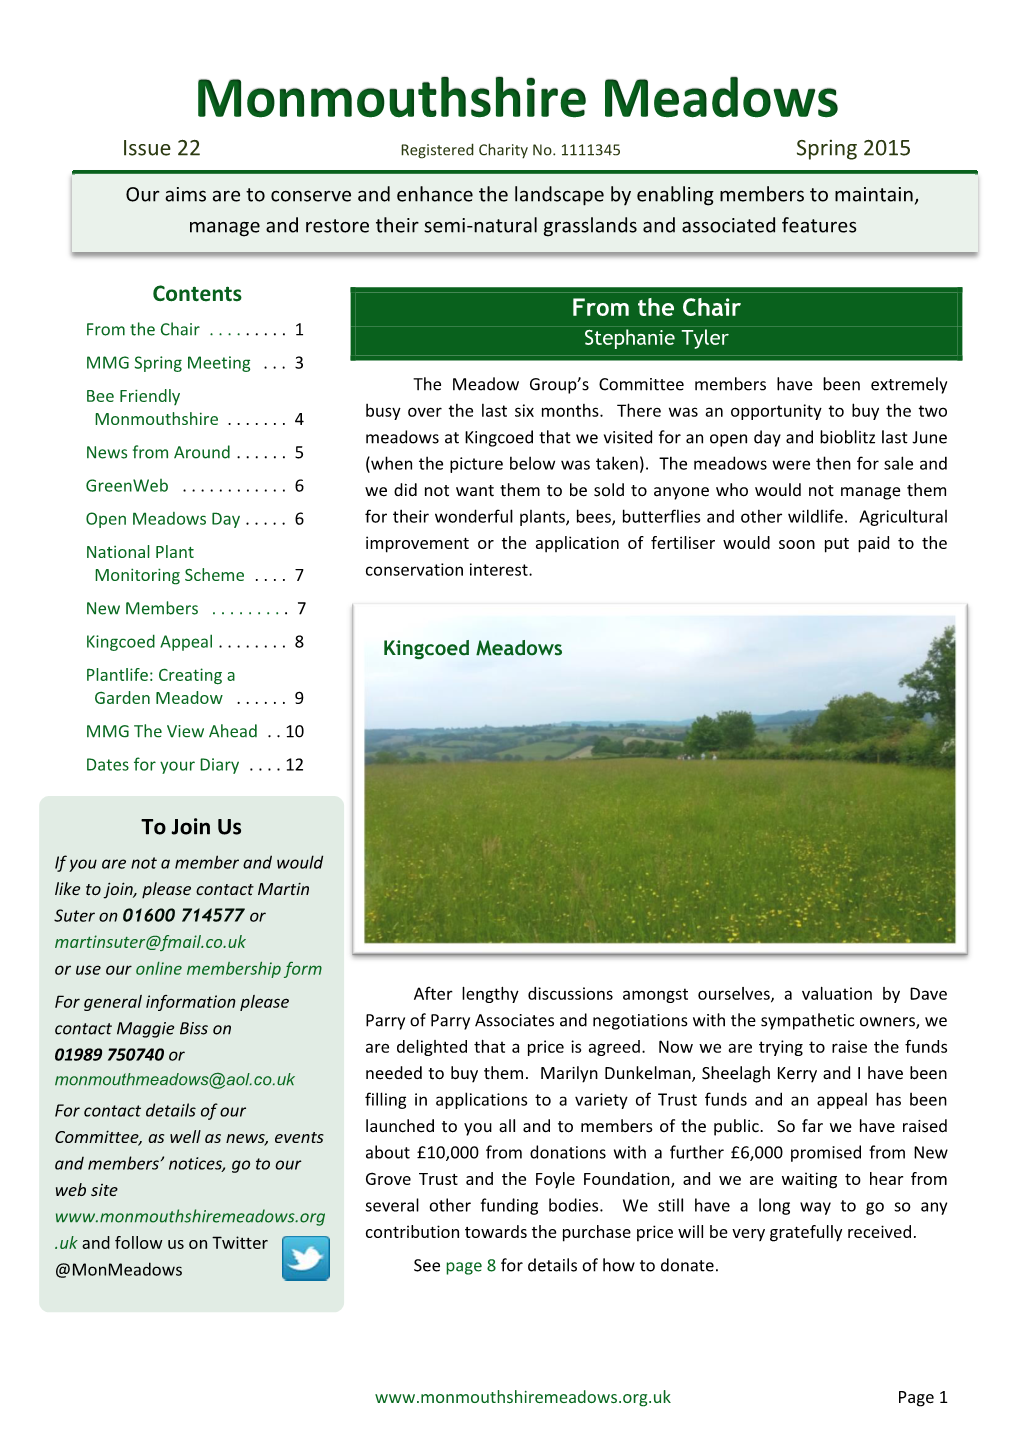 Monmouthshire Meadows Issue 22 Registered Charity No